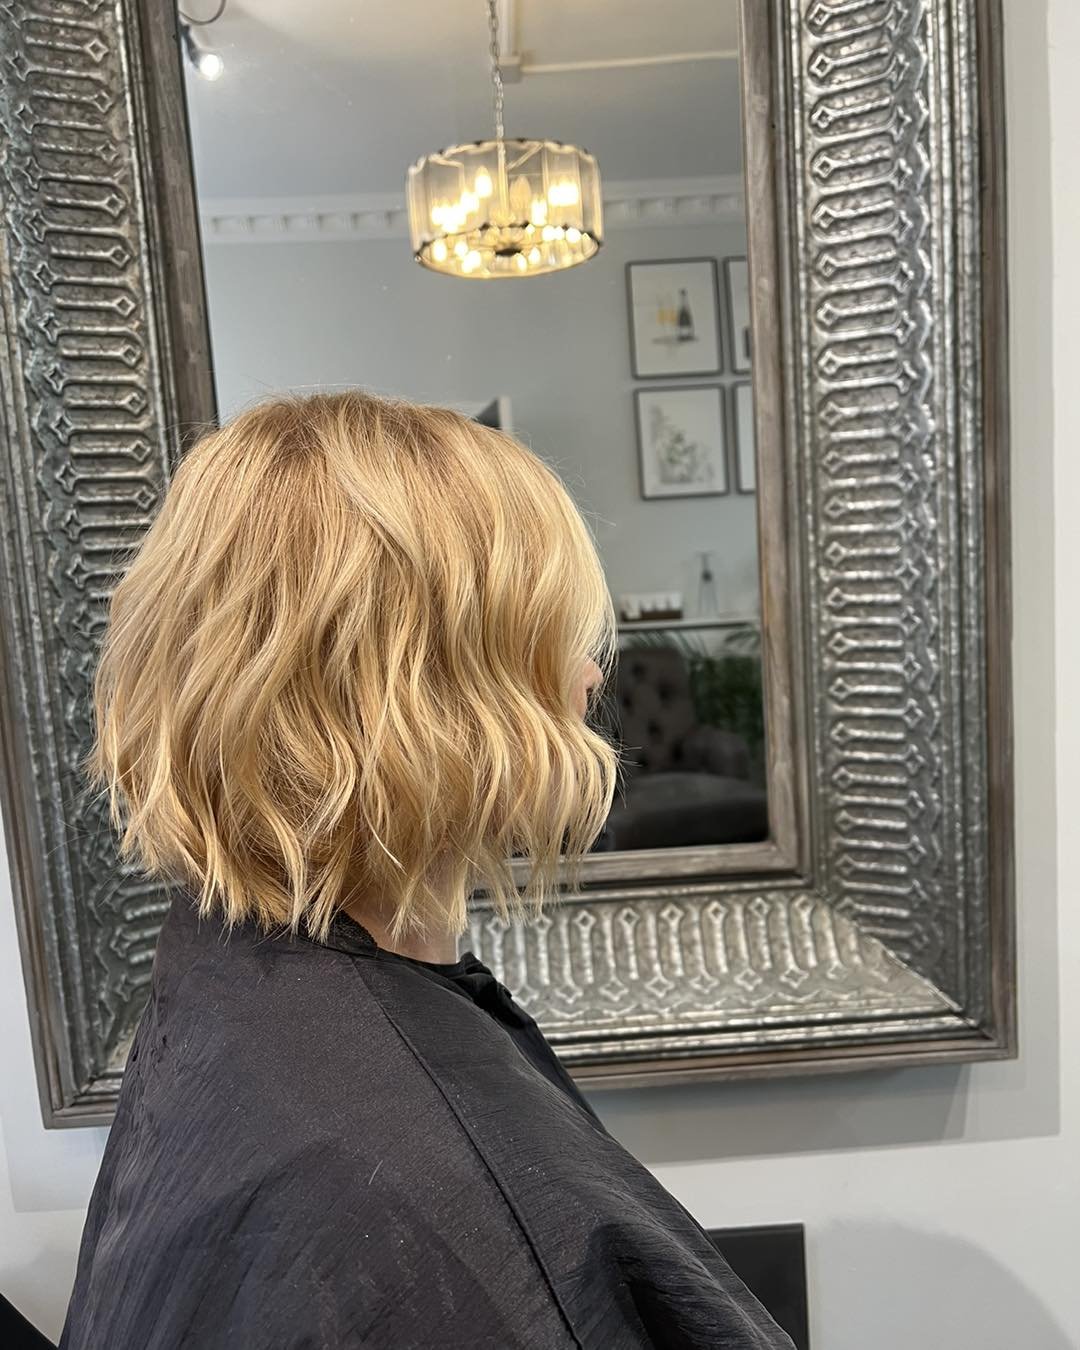 🌟 Get ready to rock a chic and trendy wavy blonde bob by Tom! 🌟

Tom's expertise will transform your look with a stunning wavy bob that exudes style and sophistication. 💁&zwj;♀️✨

The wavy texture adds volume and movement to your hair, creating a 